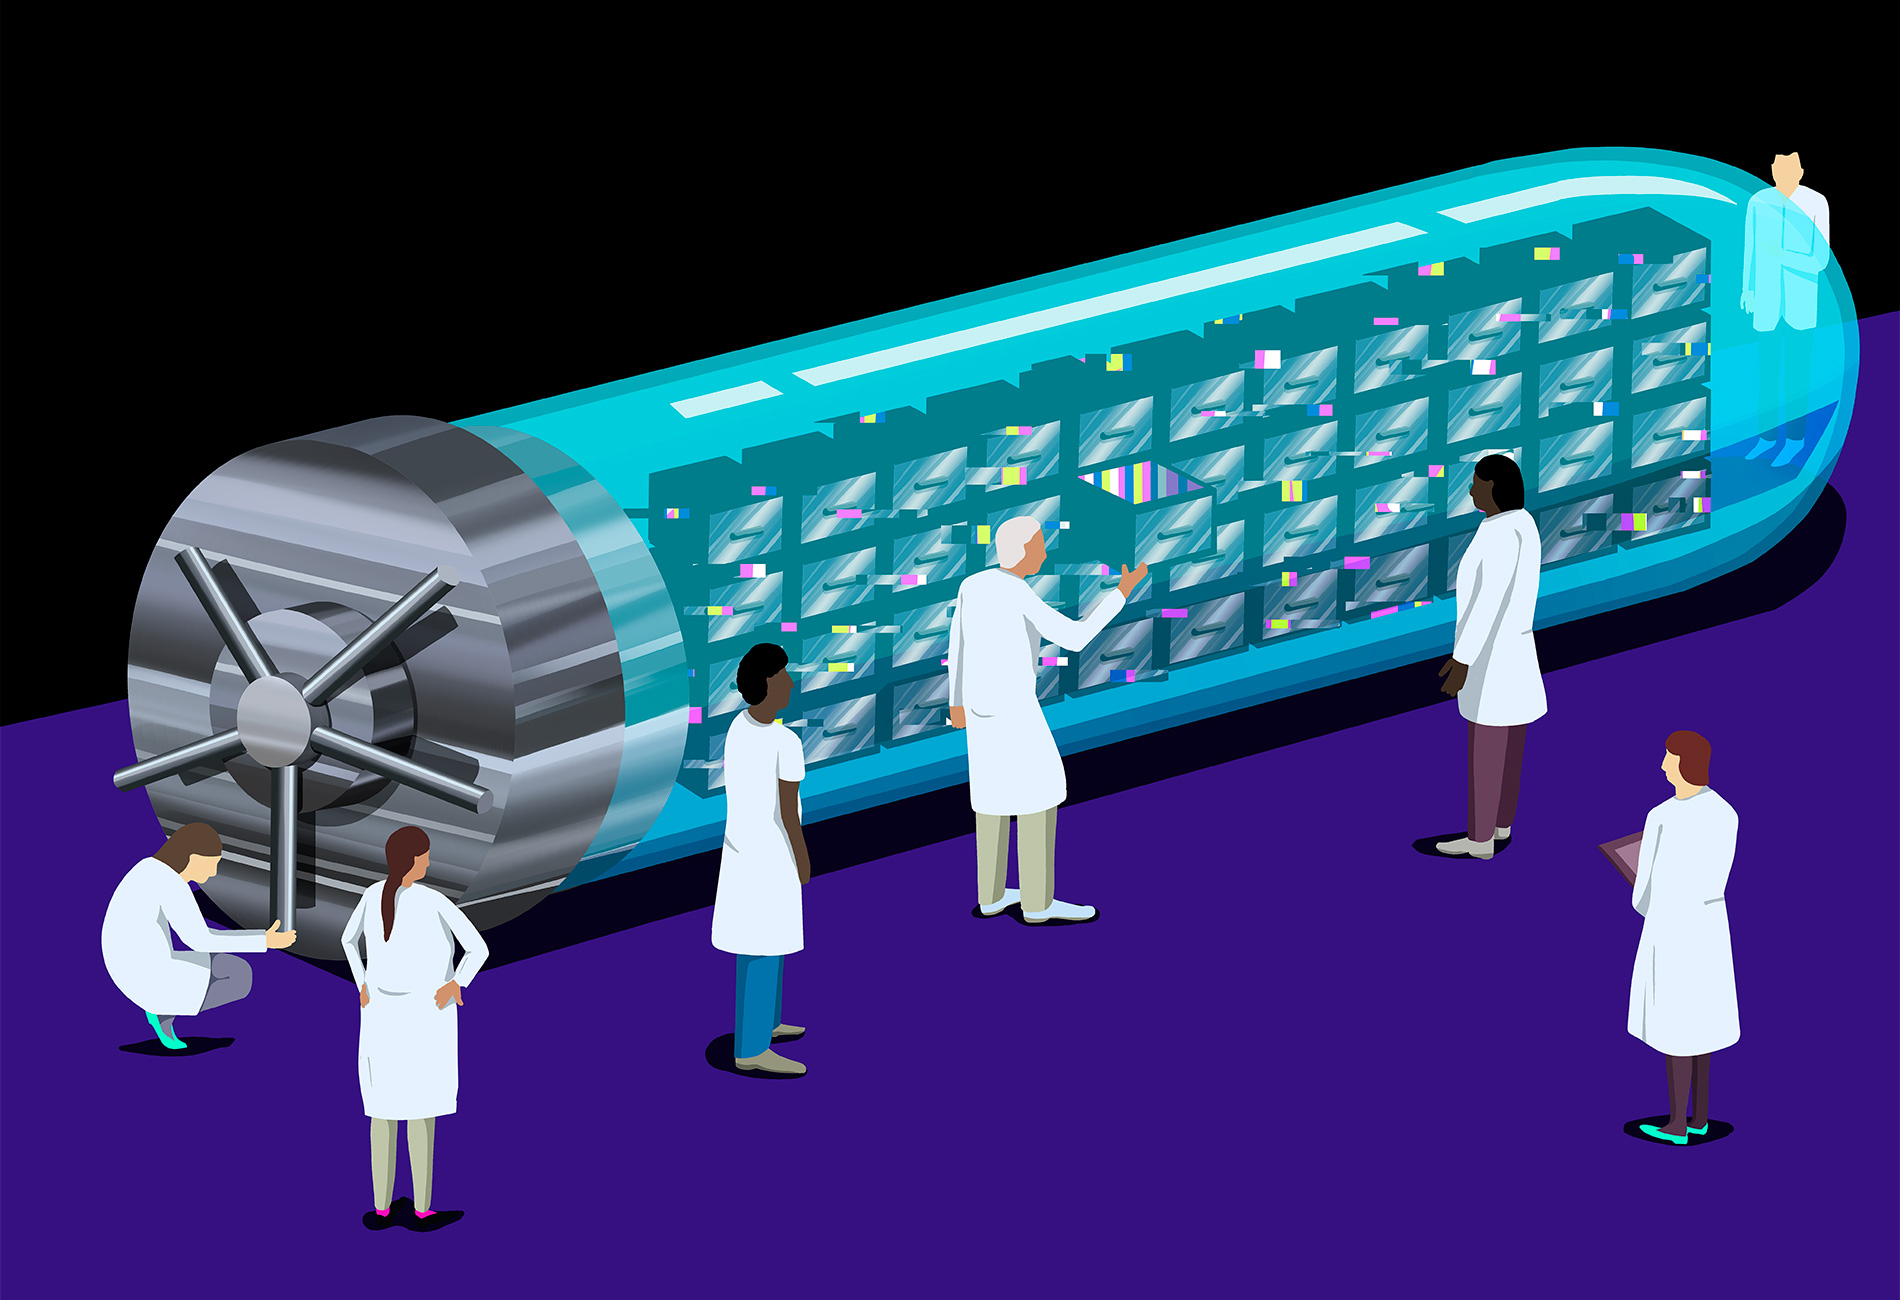 Illustration shows a giant lab vial that is also a safe full of secure records, surrounded by researchers who are accessing the data within.